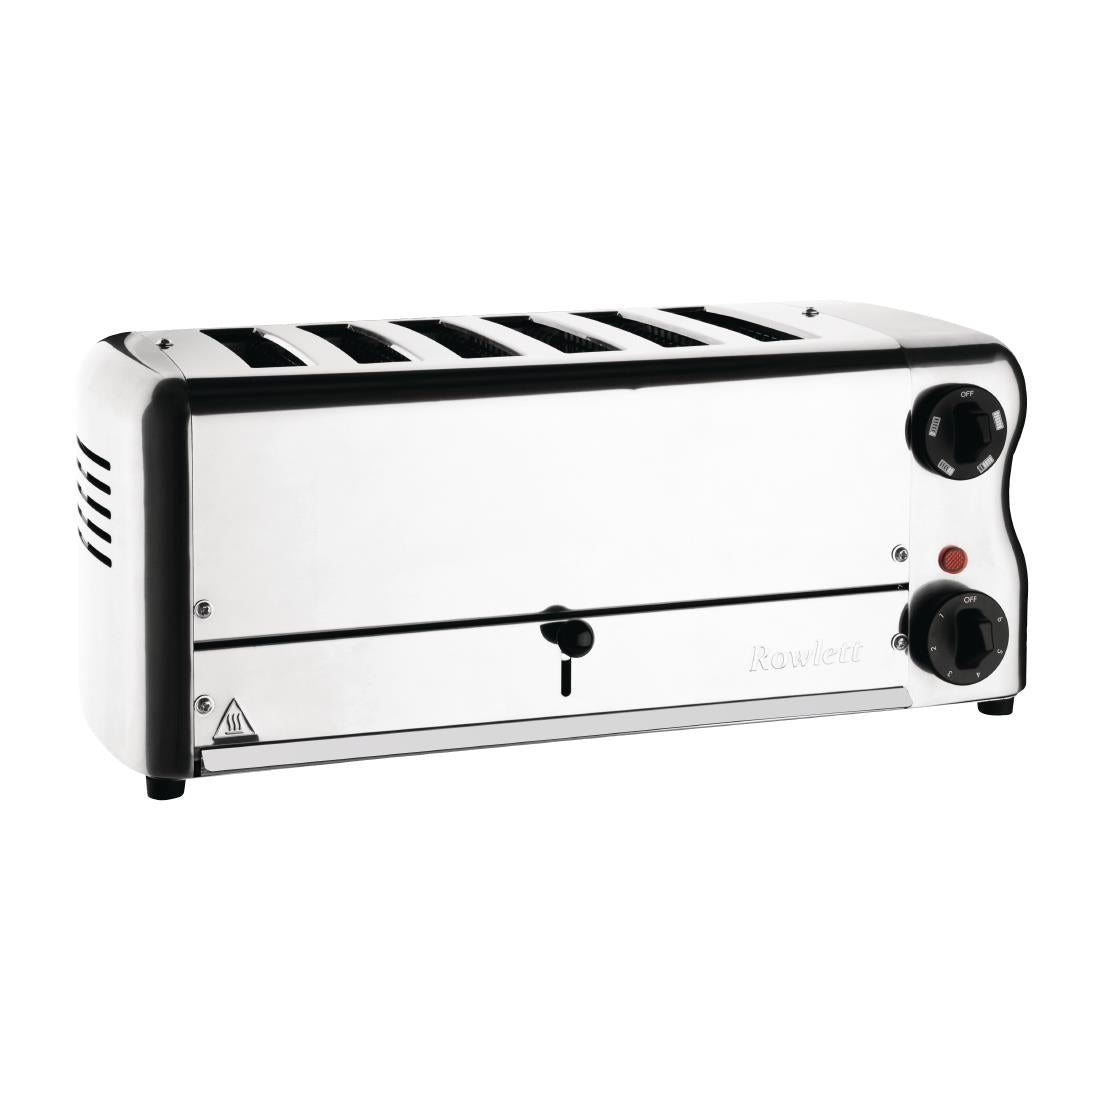 CH185 Rowlett Esprit 6 Slot Toaster Chrome w/2x Additional Elements & Sandwich Cage JD Catering Equipment Solutions Ltd